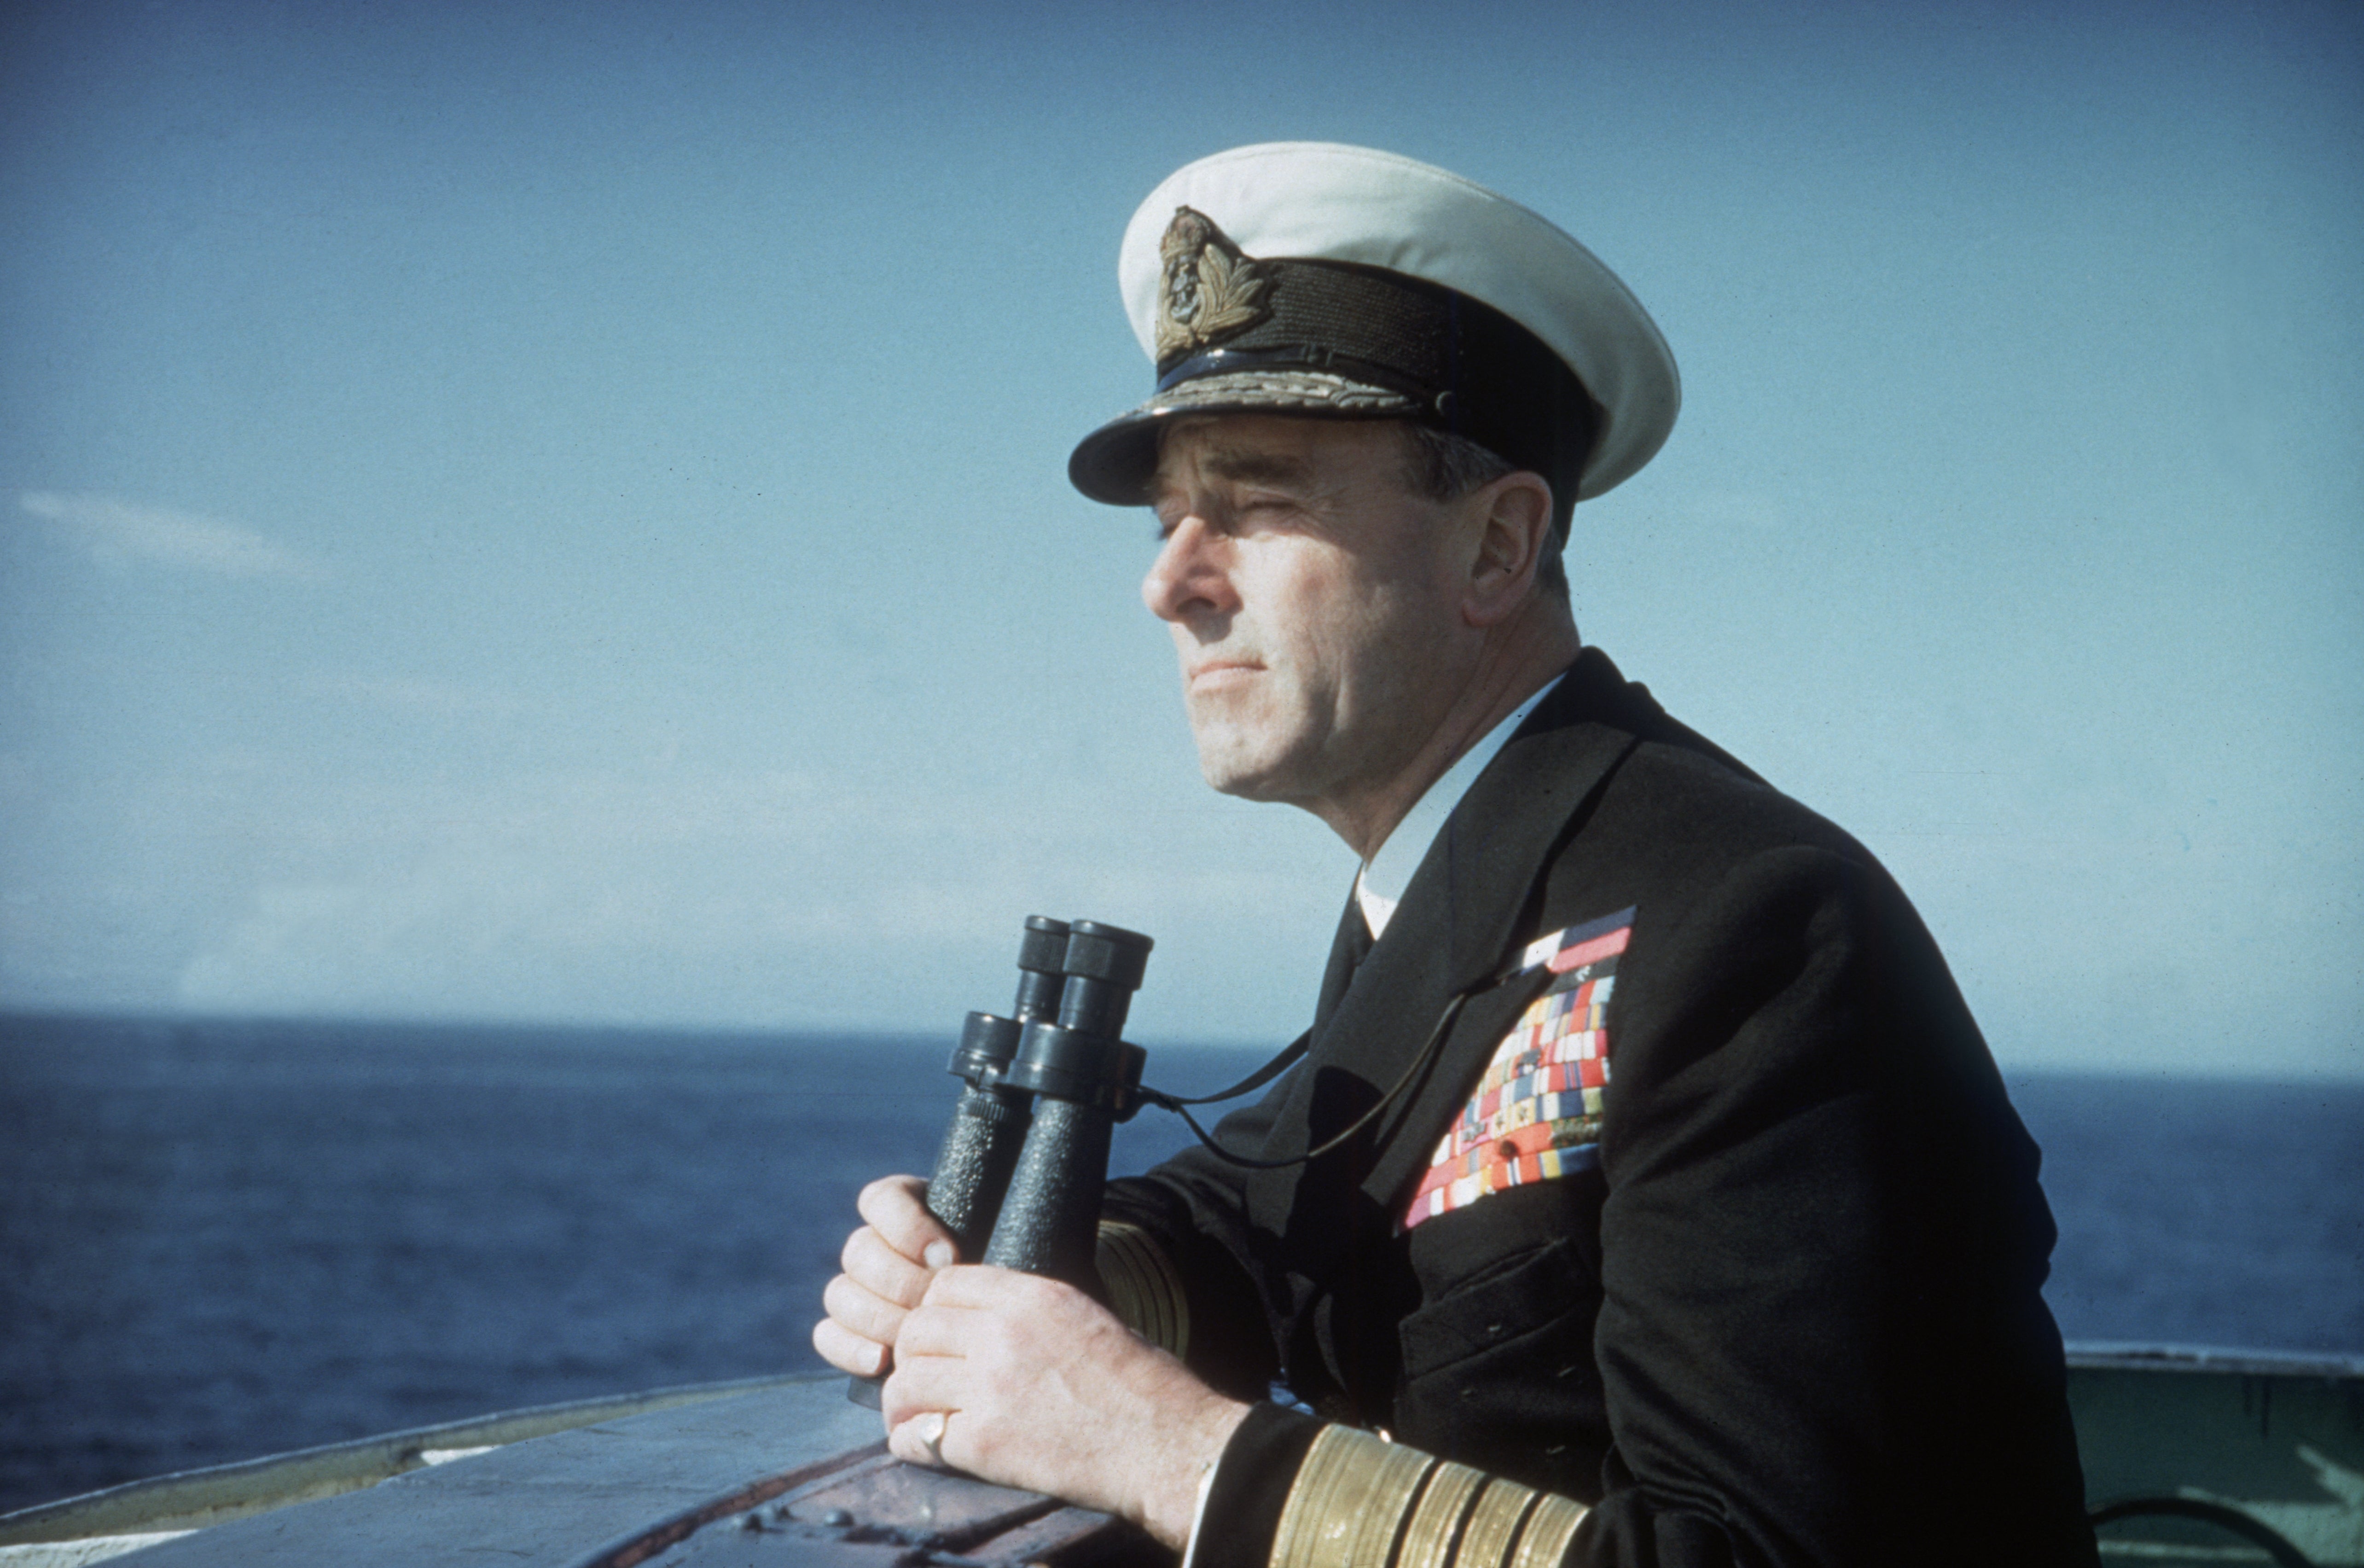 Lord Mountbatten, Commander of the Mediterranean Fleet, on naval exercises at Malta and Gibraltar in 1956